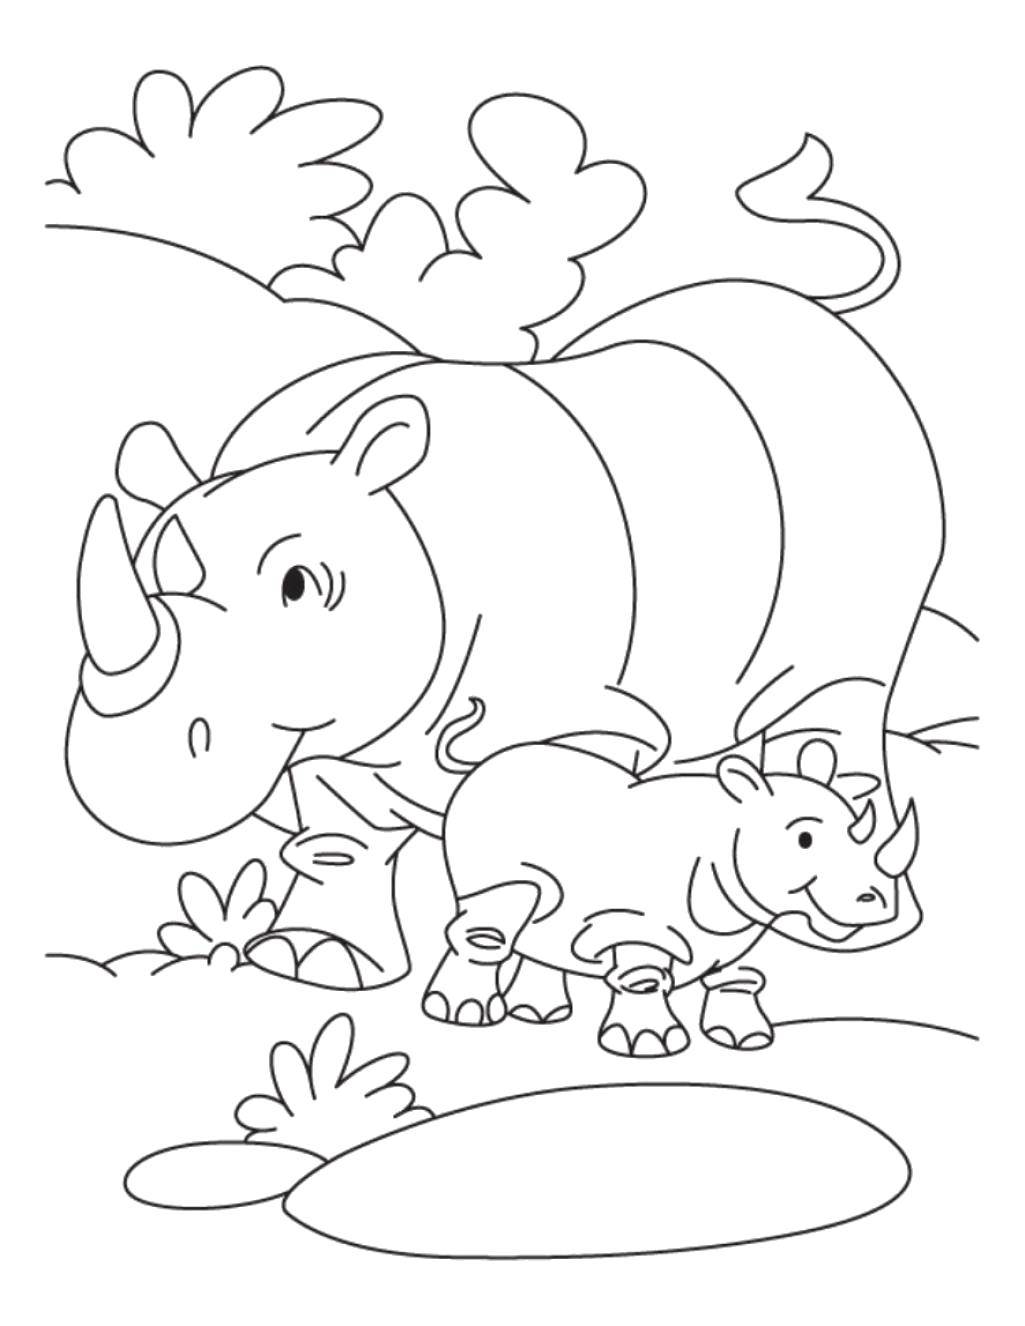 Coloring Mother Rhino and baby. Category Animals. Tags:  Animals, Rhino.